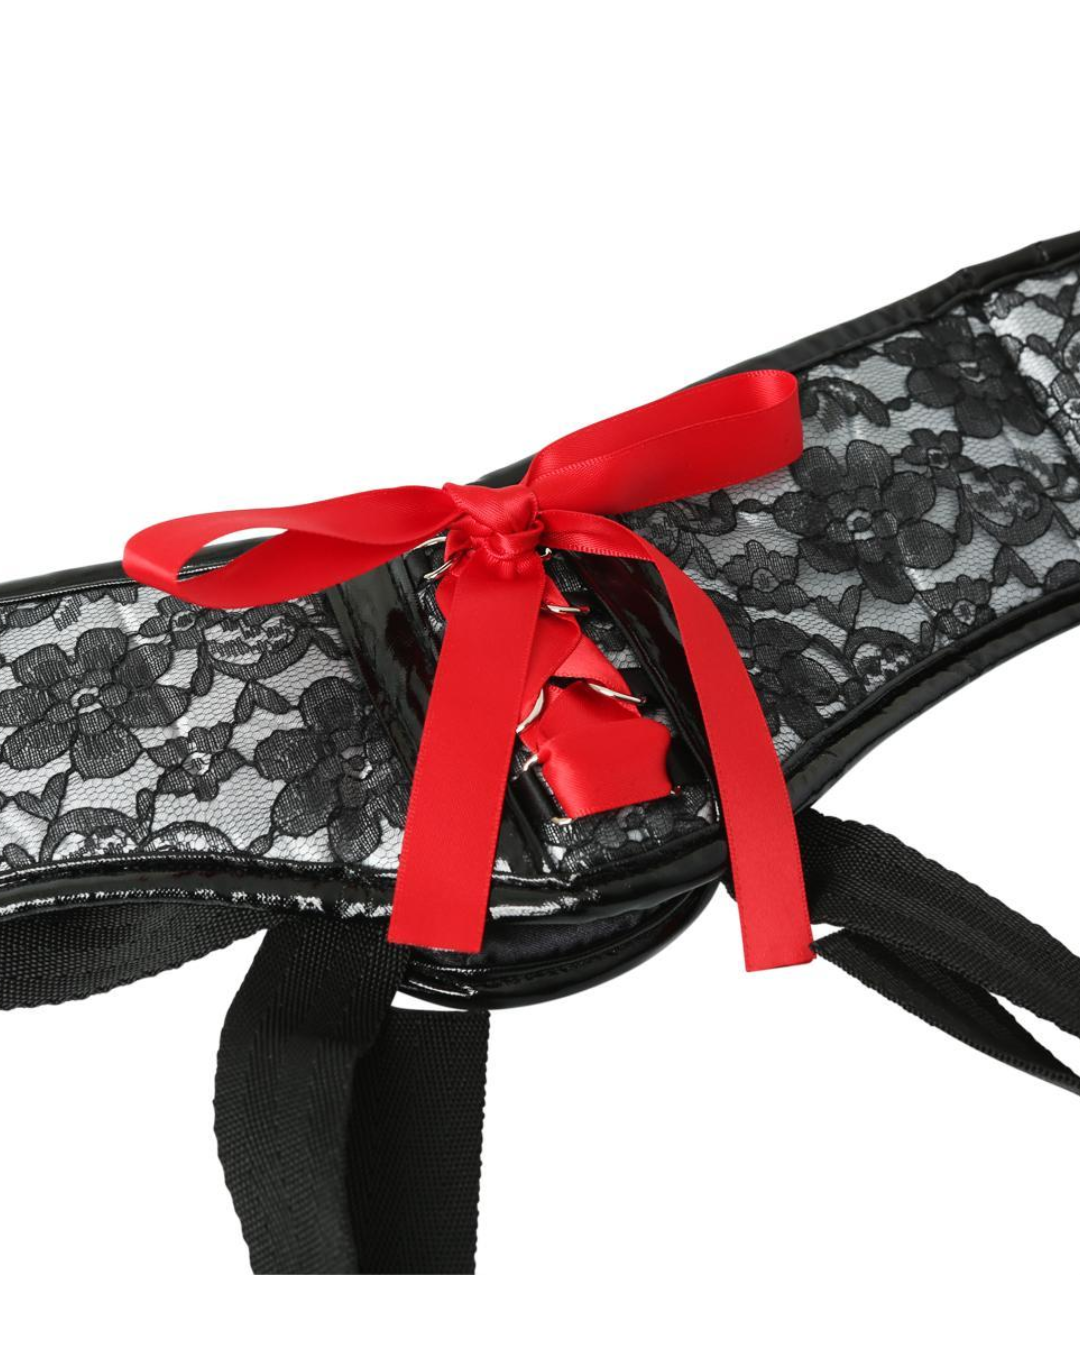 Platinum Black Lace Corsette Strap On Harness- One Size Fits Most by Sportsheets close up of back